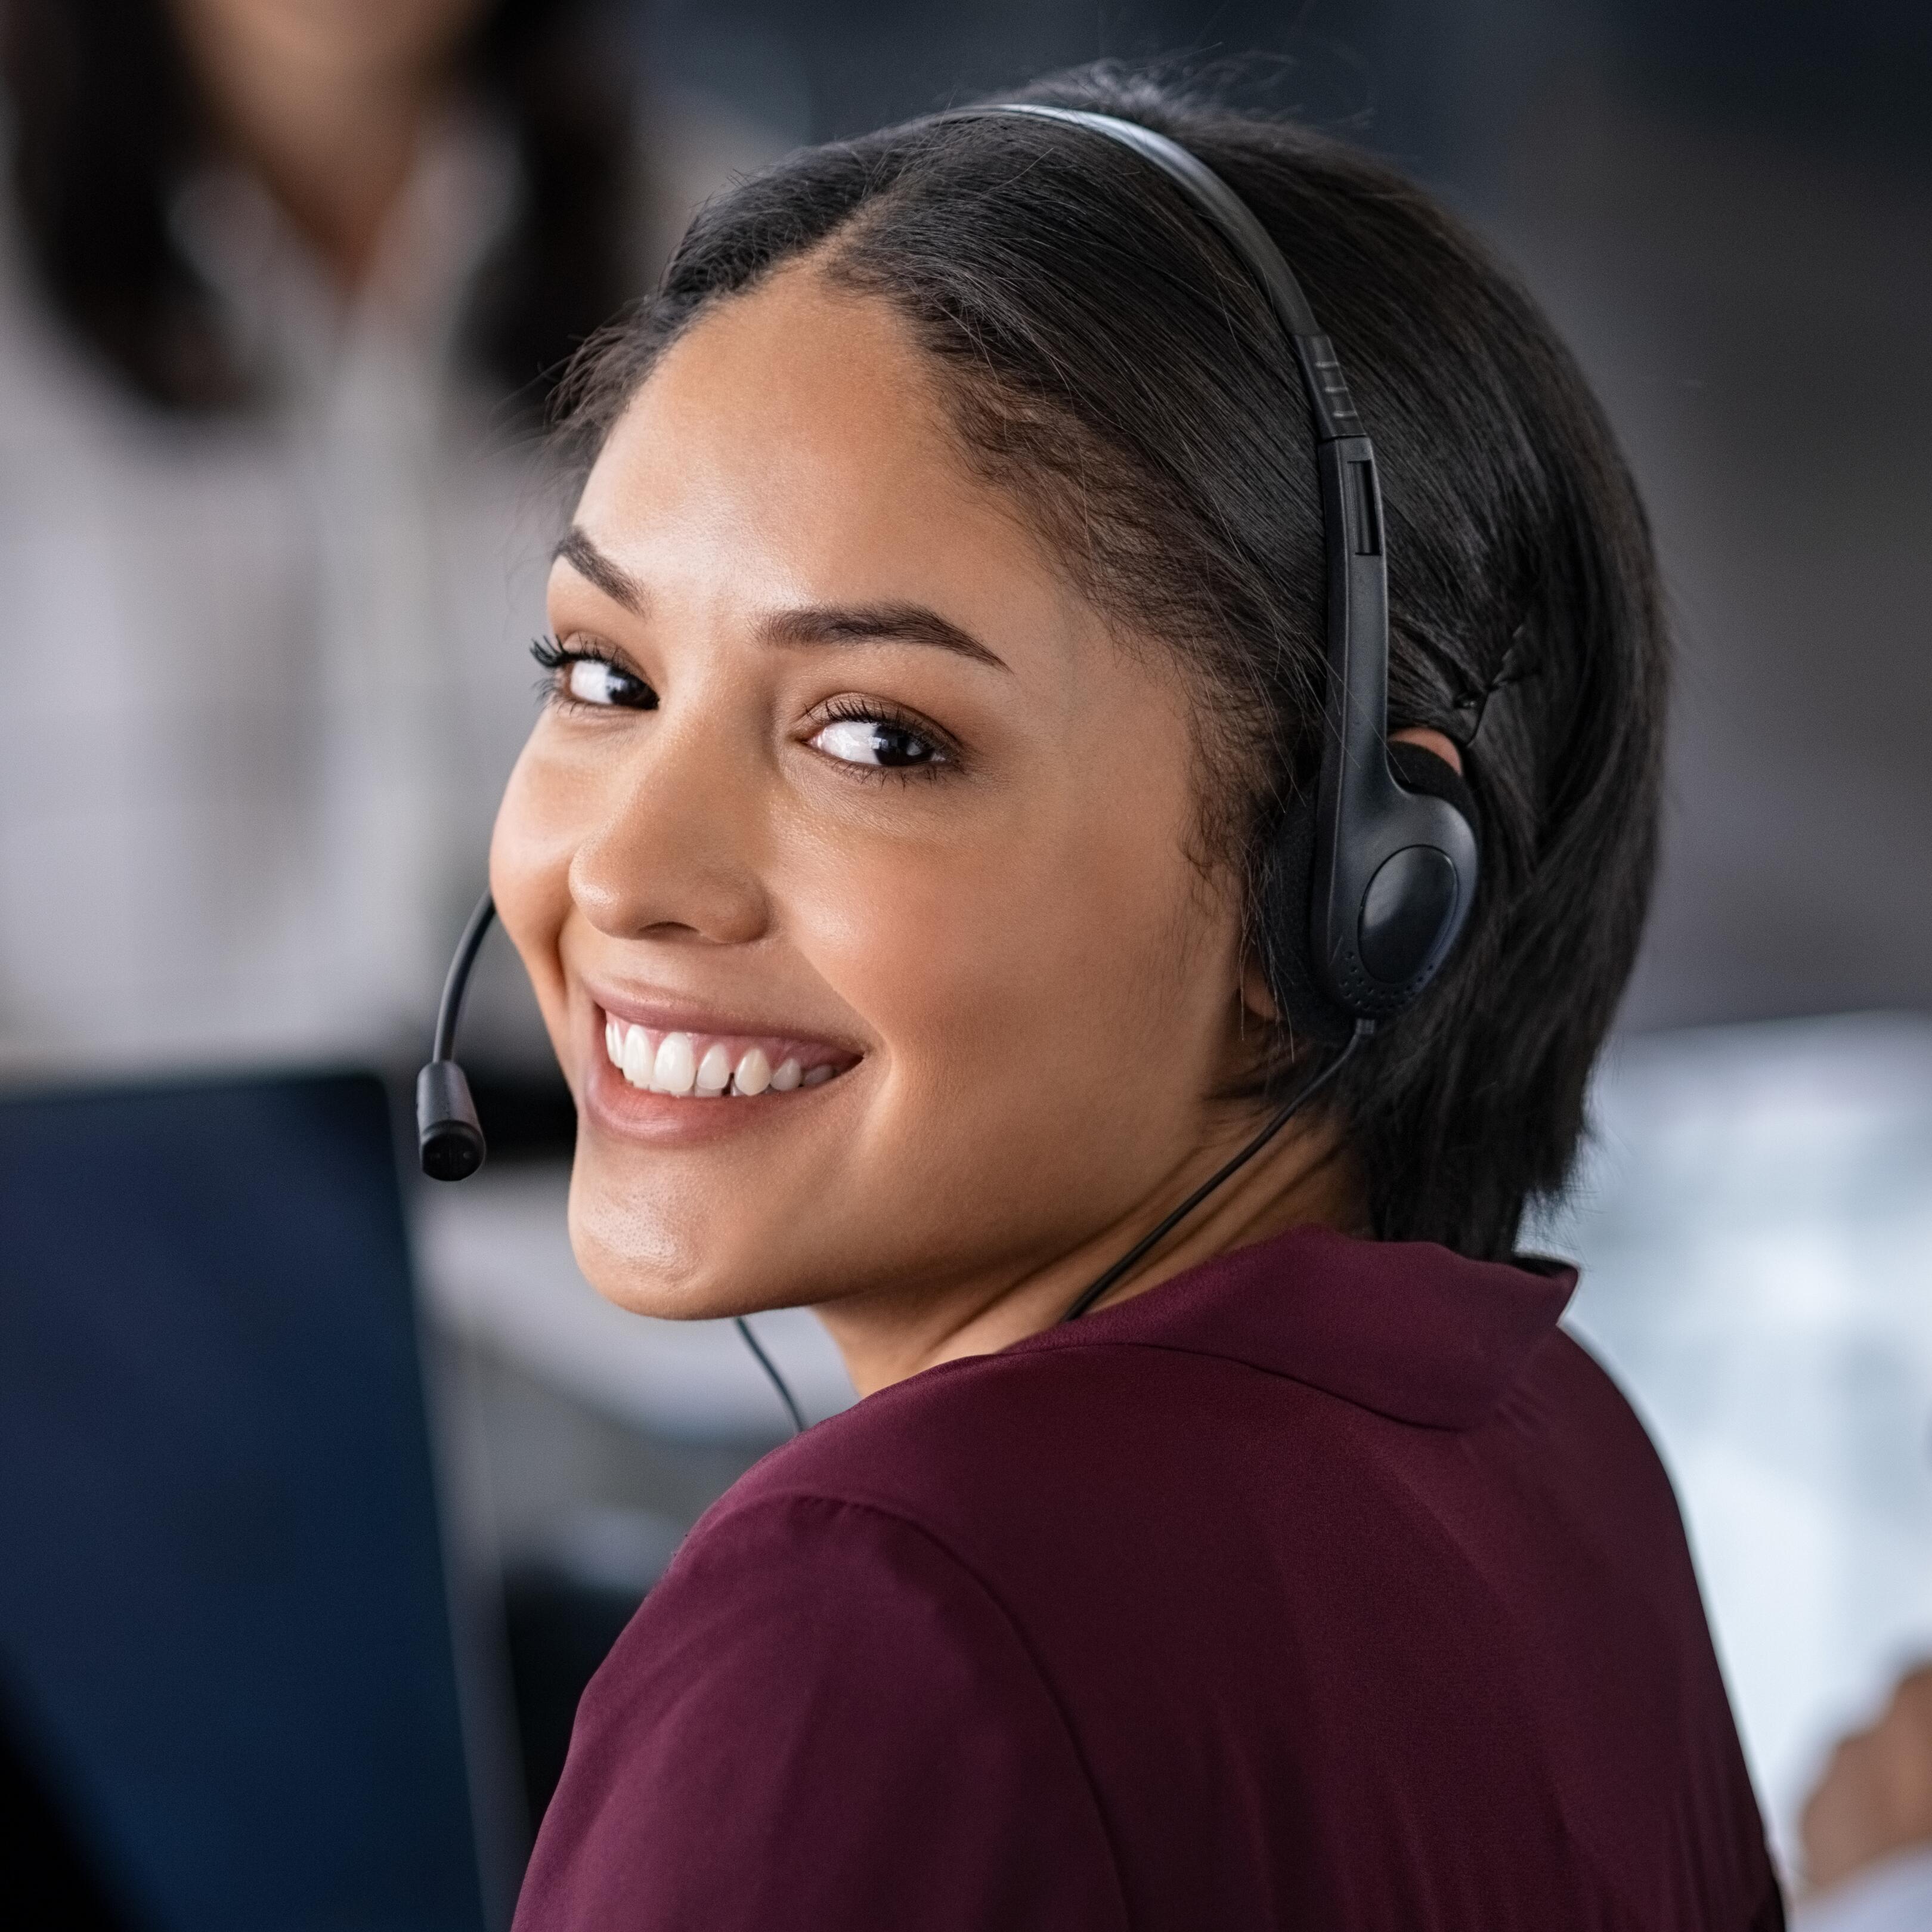 A smiling staff member wearing a headset